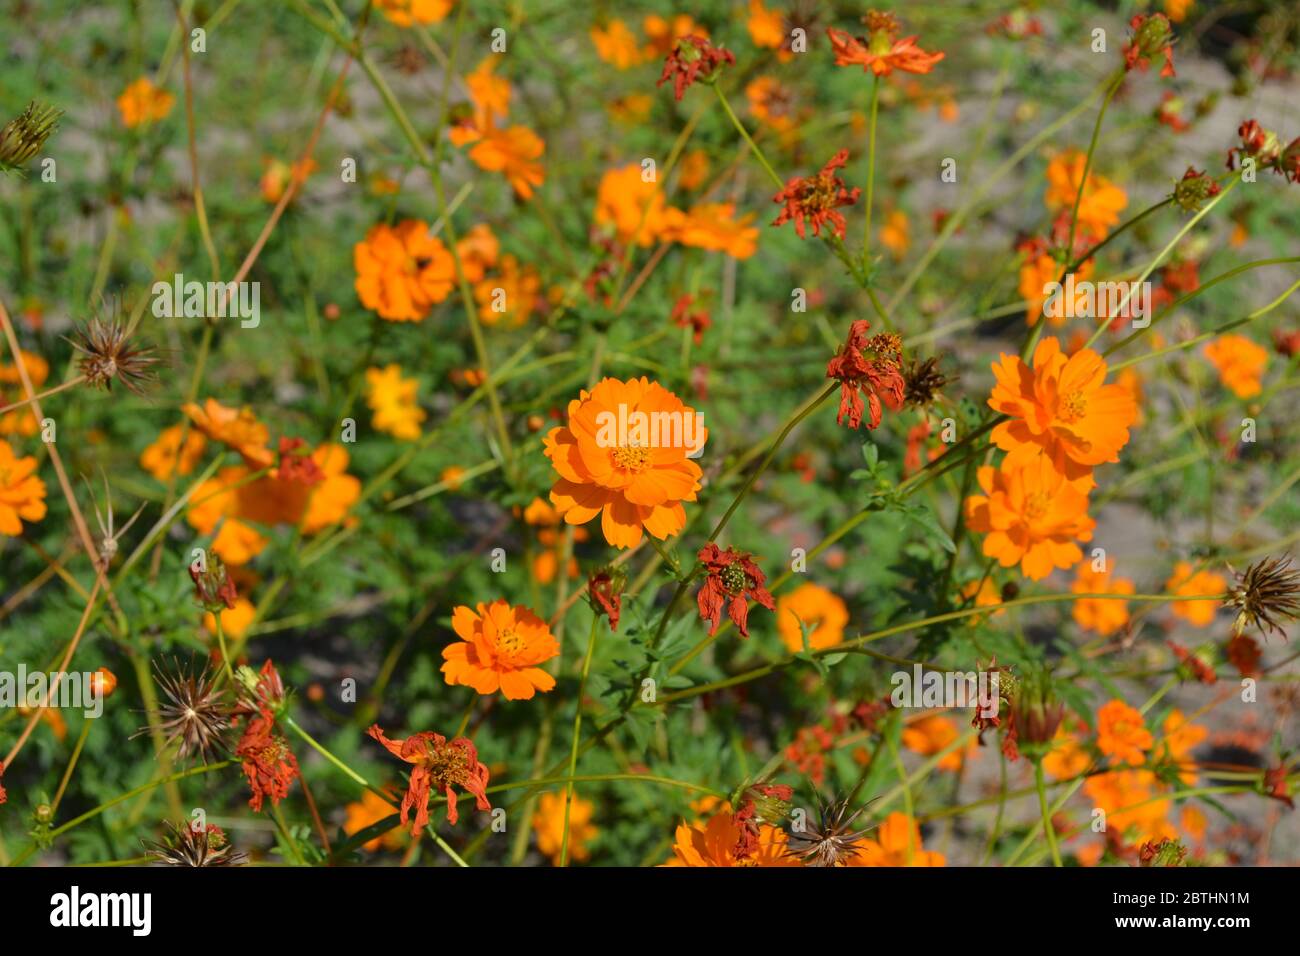 Sunny summer day. Homemade plant, gardening. Cosmos, a genus of annual and perennial herbaceous plants of the family Asteraceae. Orange flowers Stock Photo